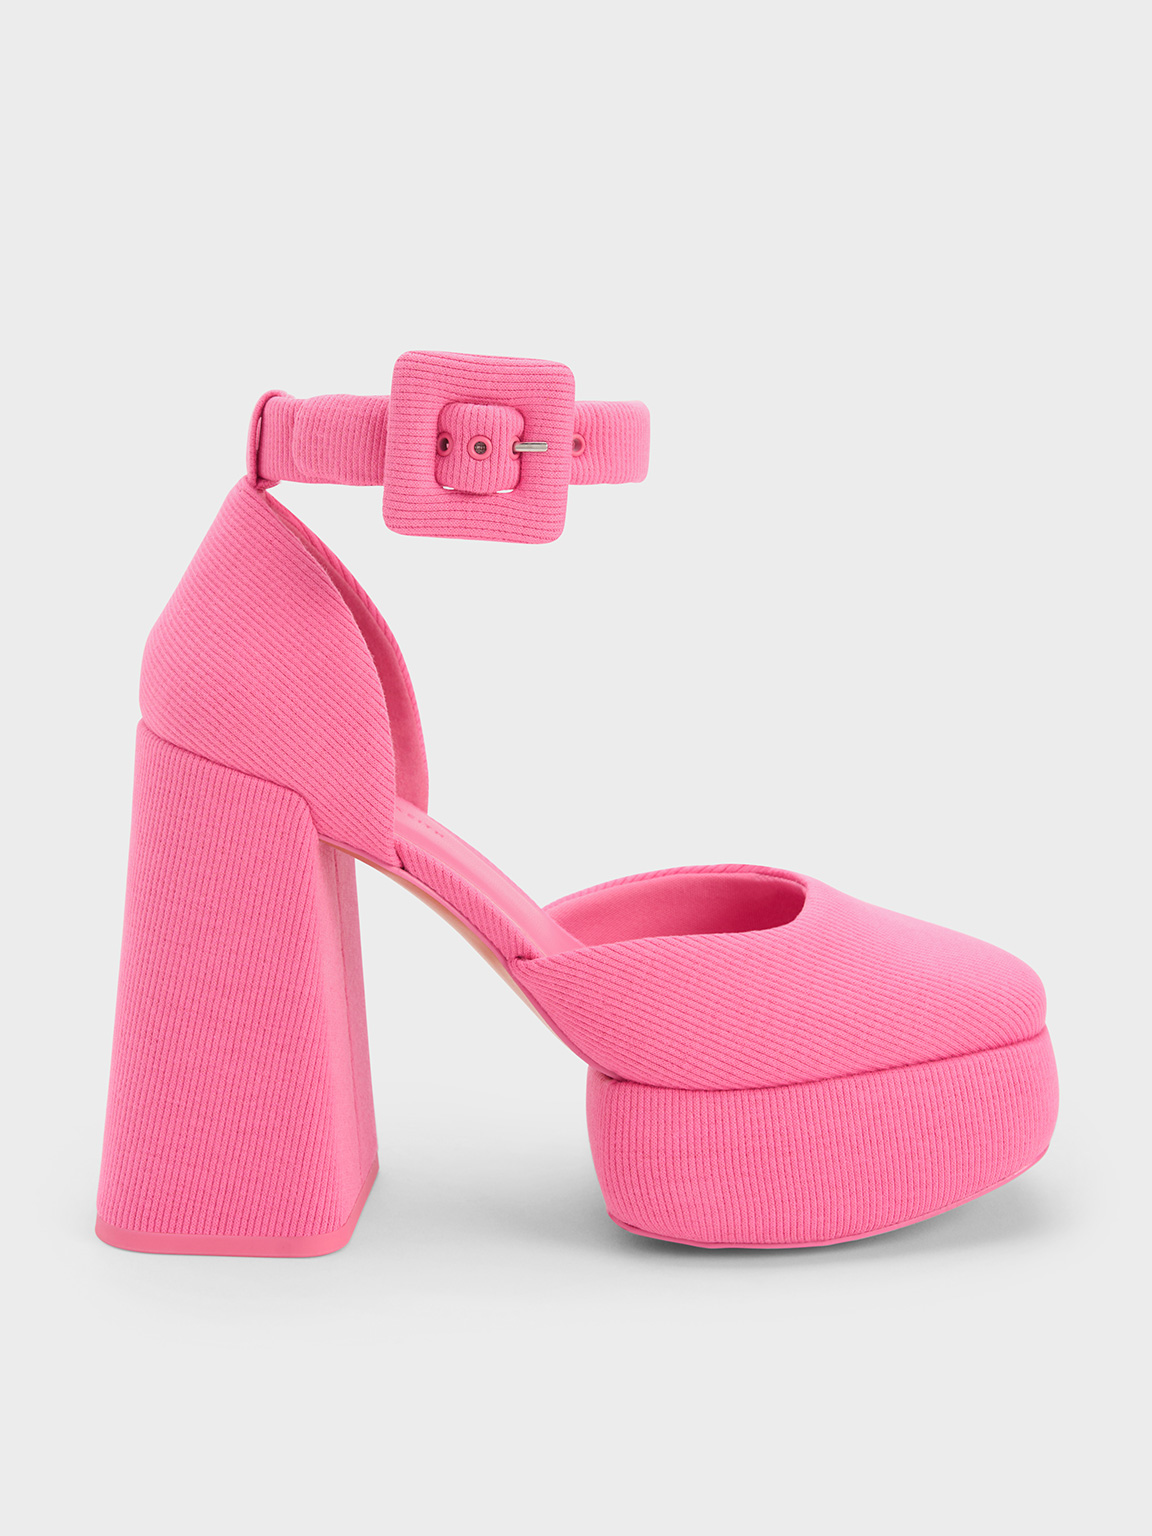 Pink Sinead Woven Buckled D'Orsay Platform Pumps | CHARLES & KEITH